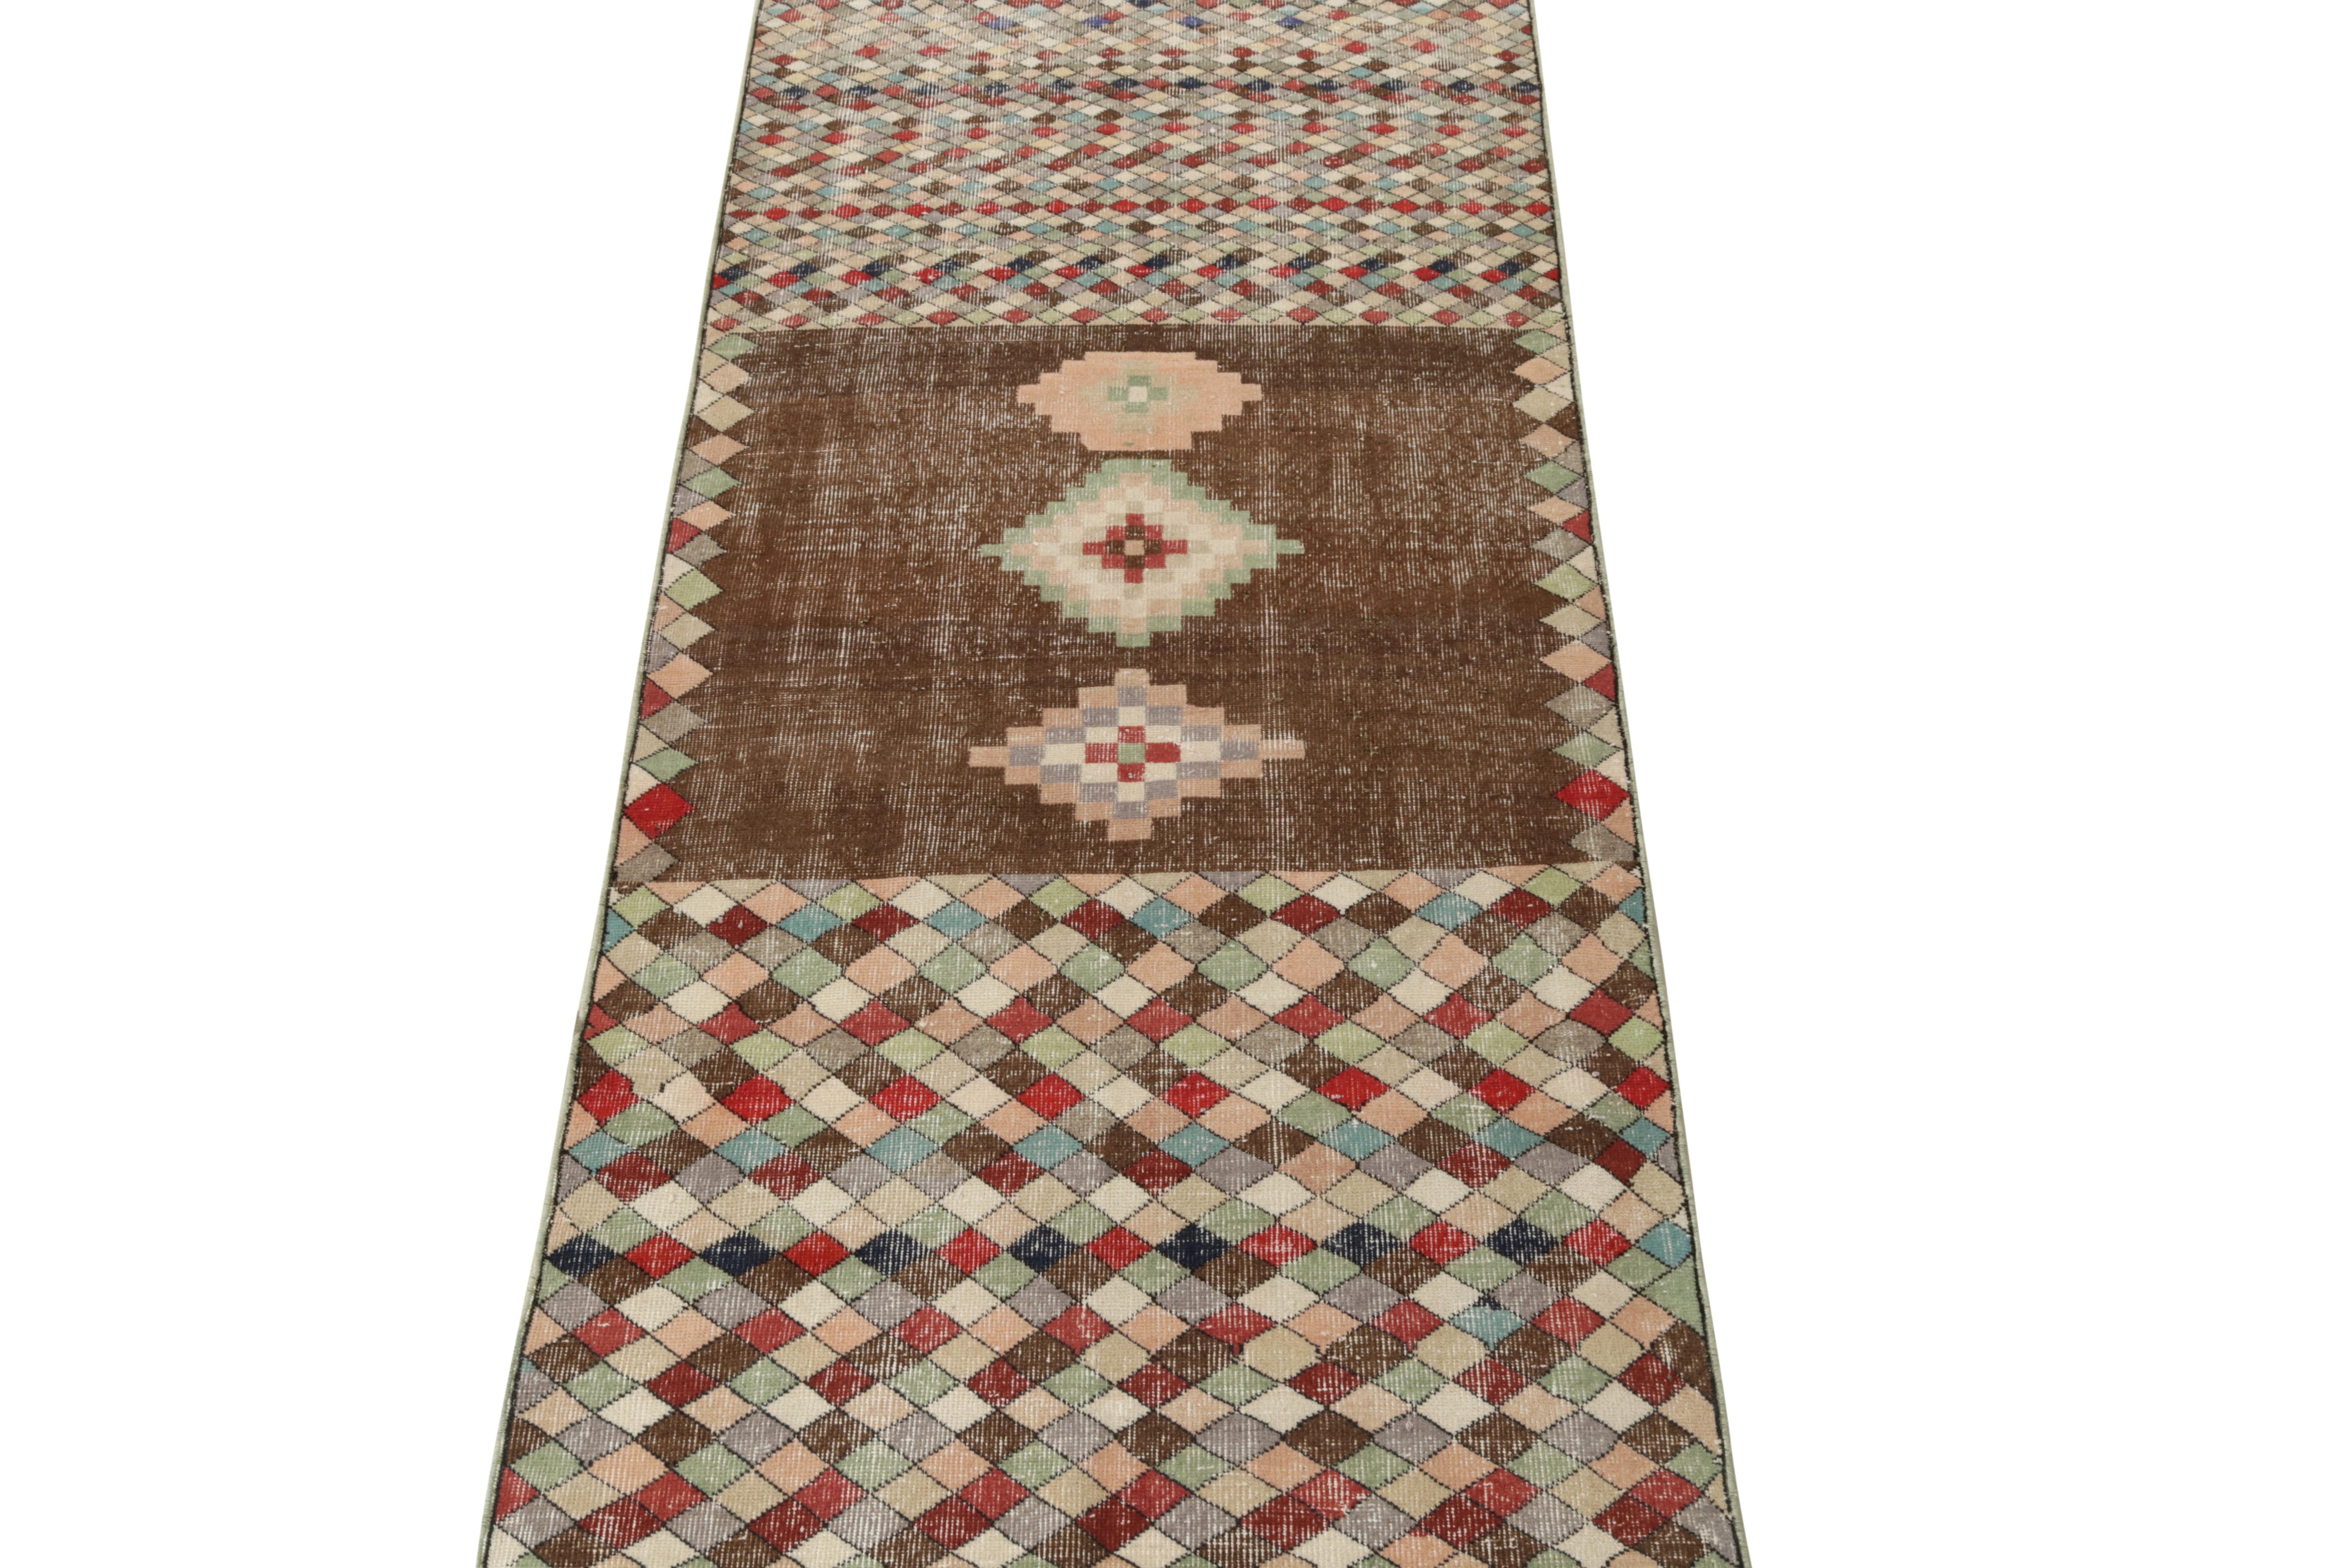 Hand-knotted in wool from Turkey originating between 1960-1970, this vintage mid-century modern rug is the latest to join our midcentury Pasha collection, celebrating Turkish icon and multidisciplinary designer Zeki Müren with Josh’s hand picked